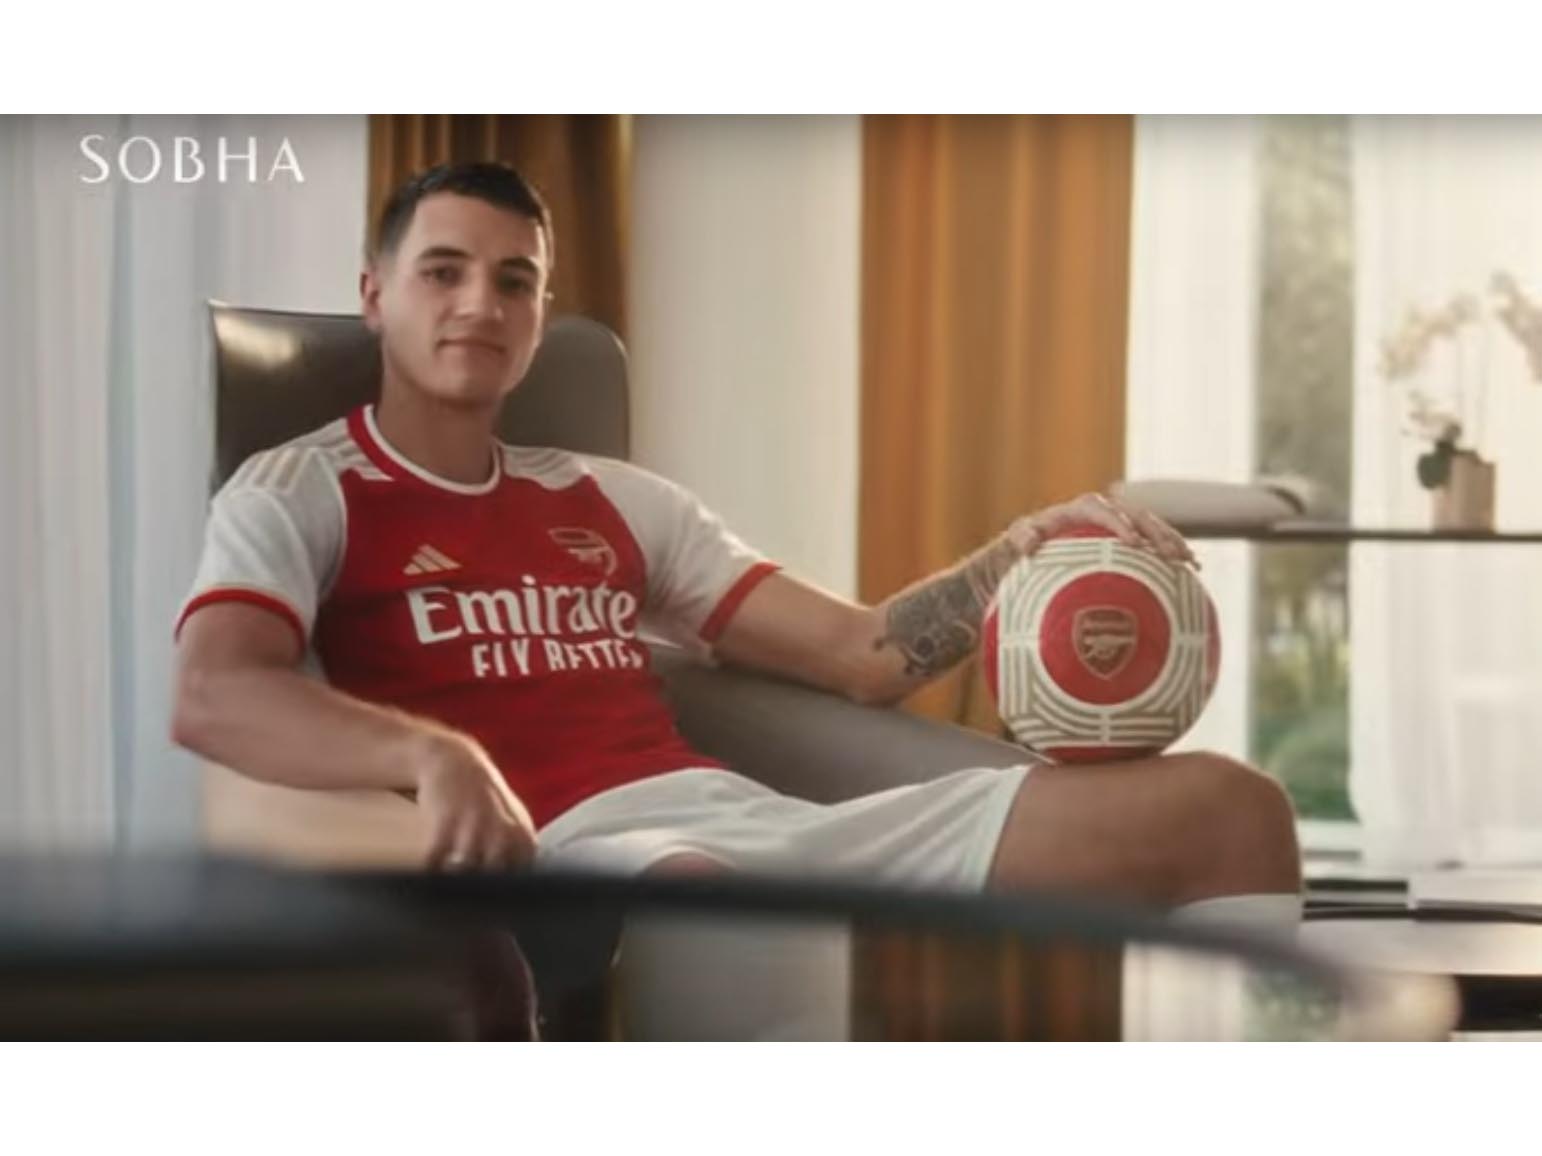 Shared values highlighted in Sobha Realty's new brand film starring Arsenal players